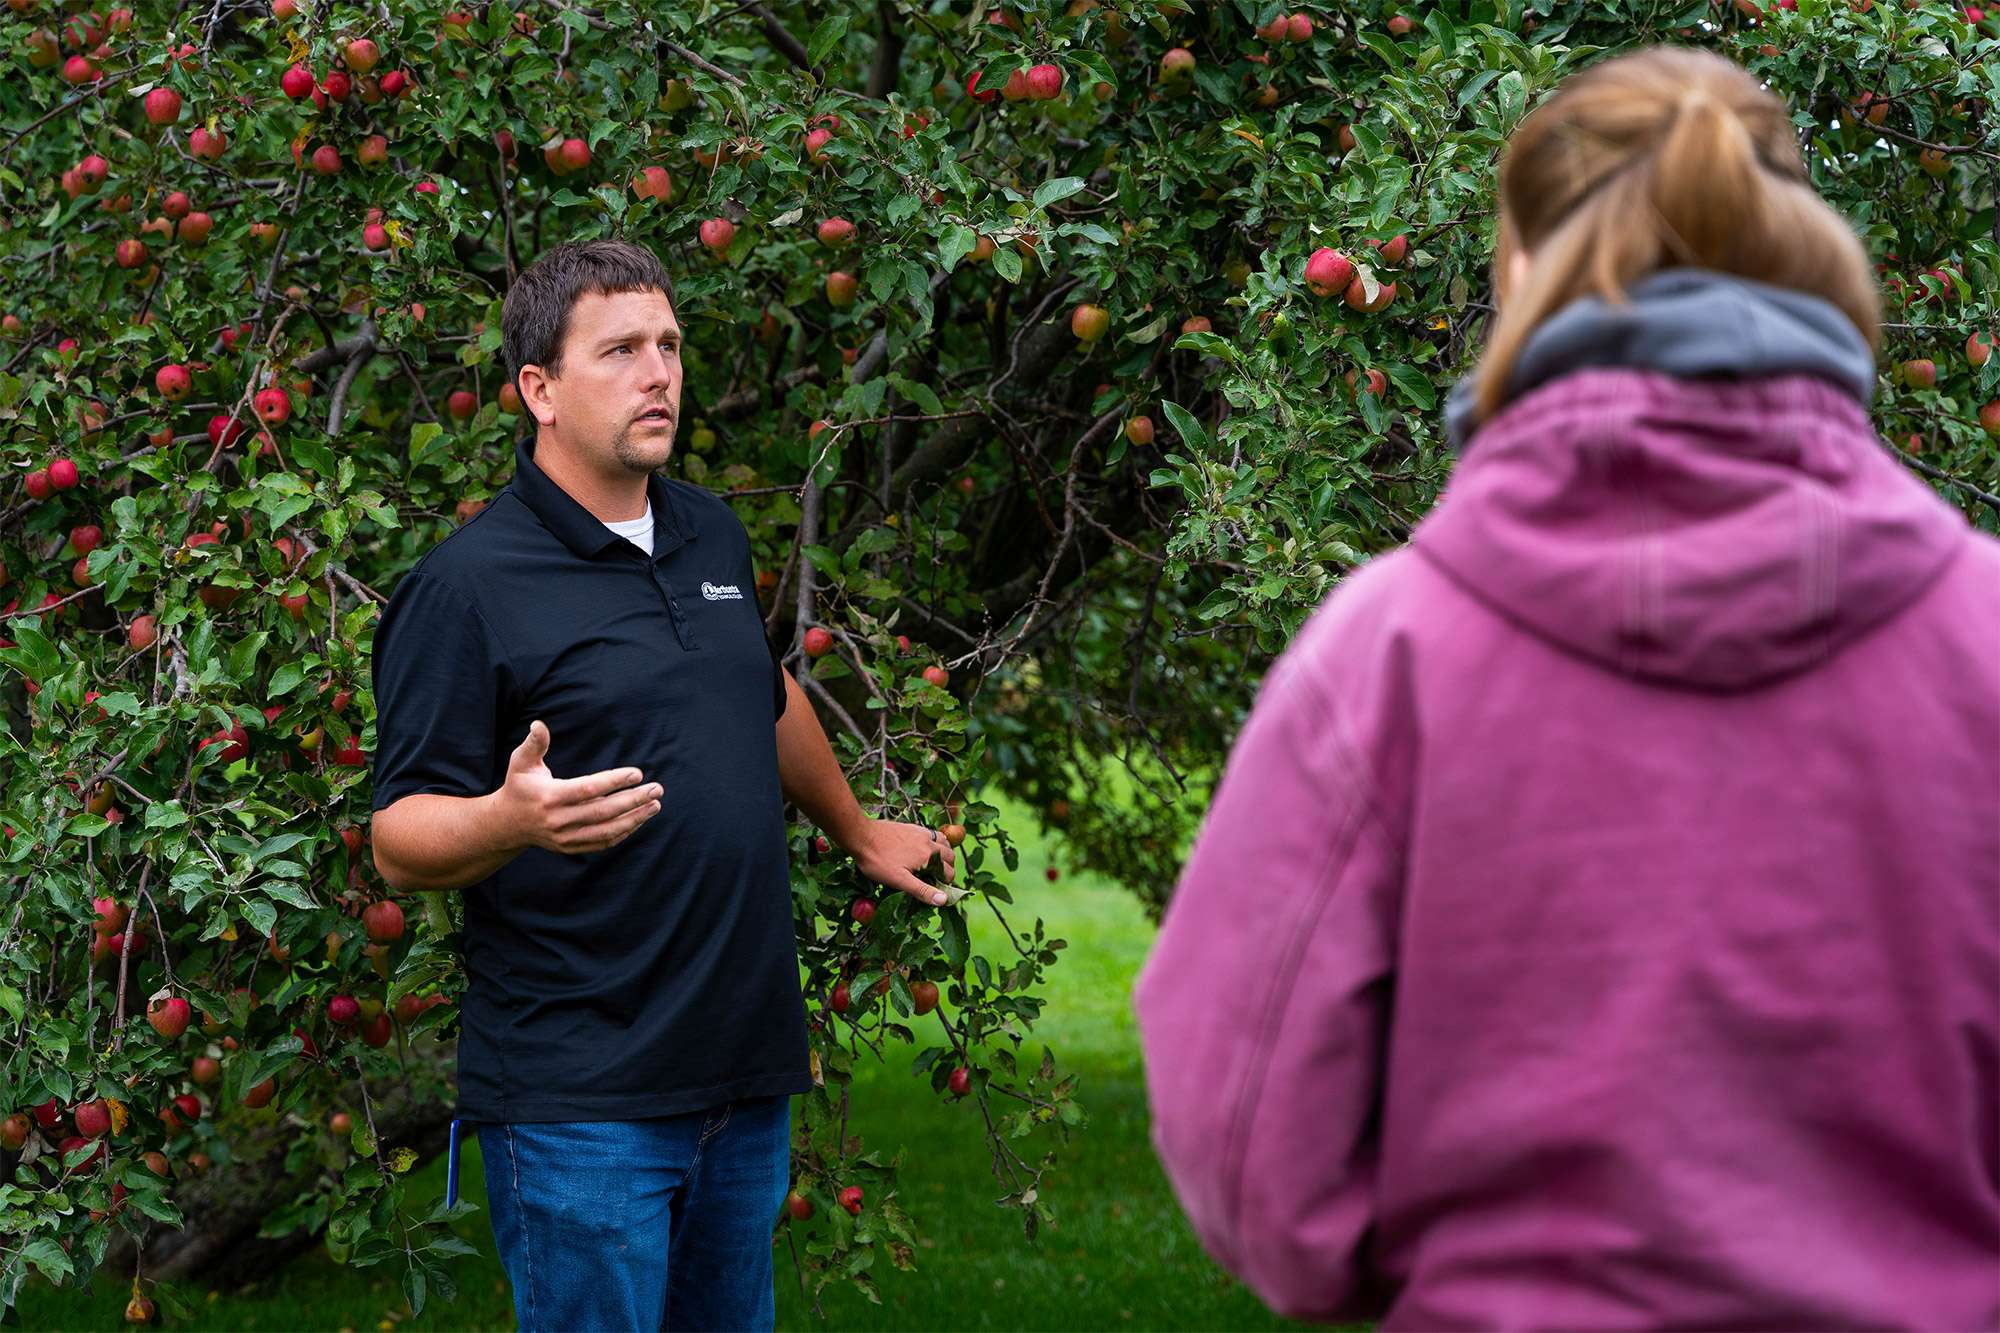 A man is standing next to apple trees, giving an explanation of his crops to another person.